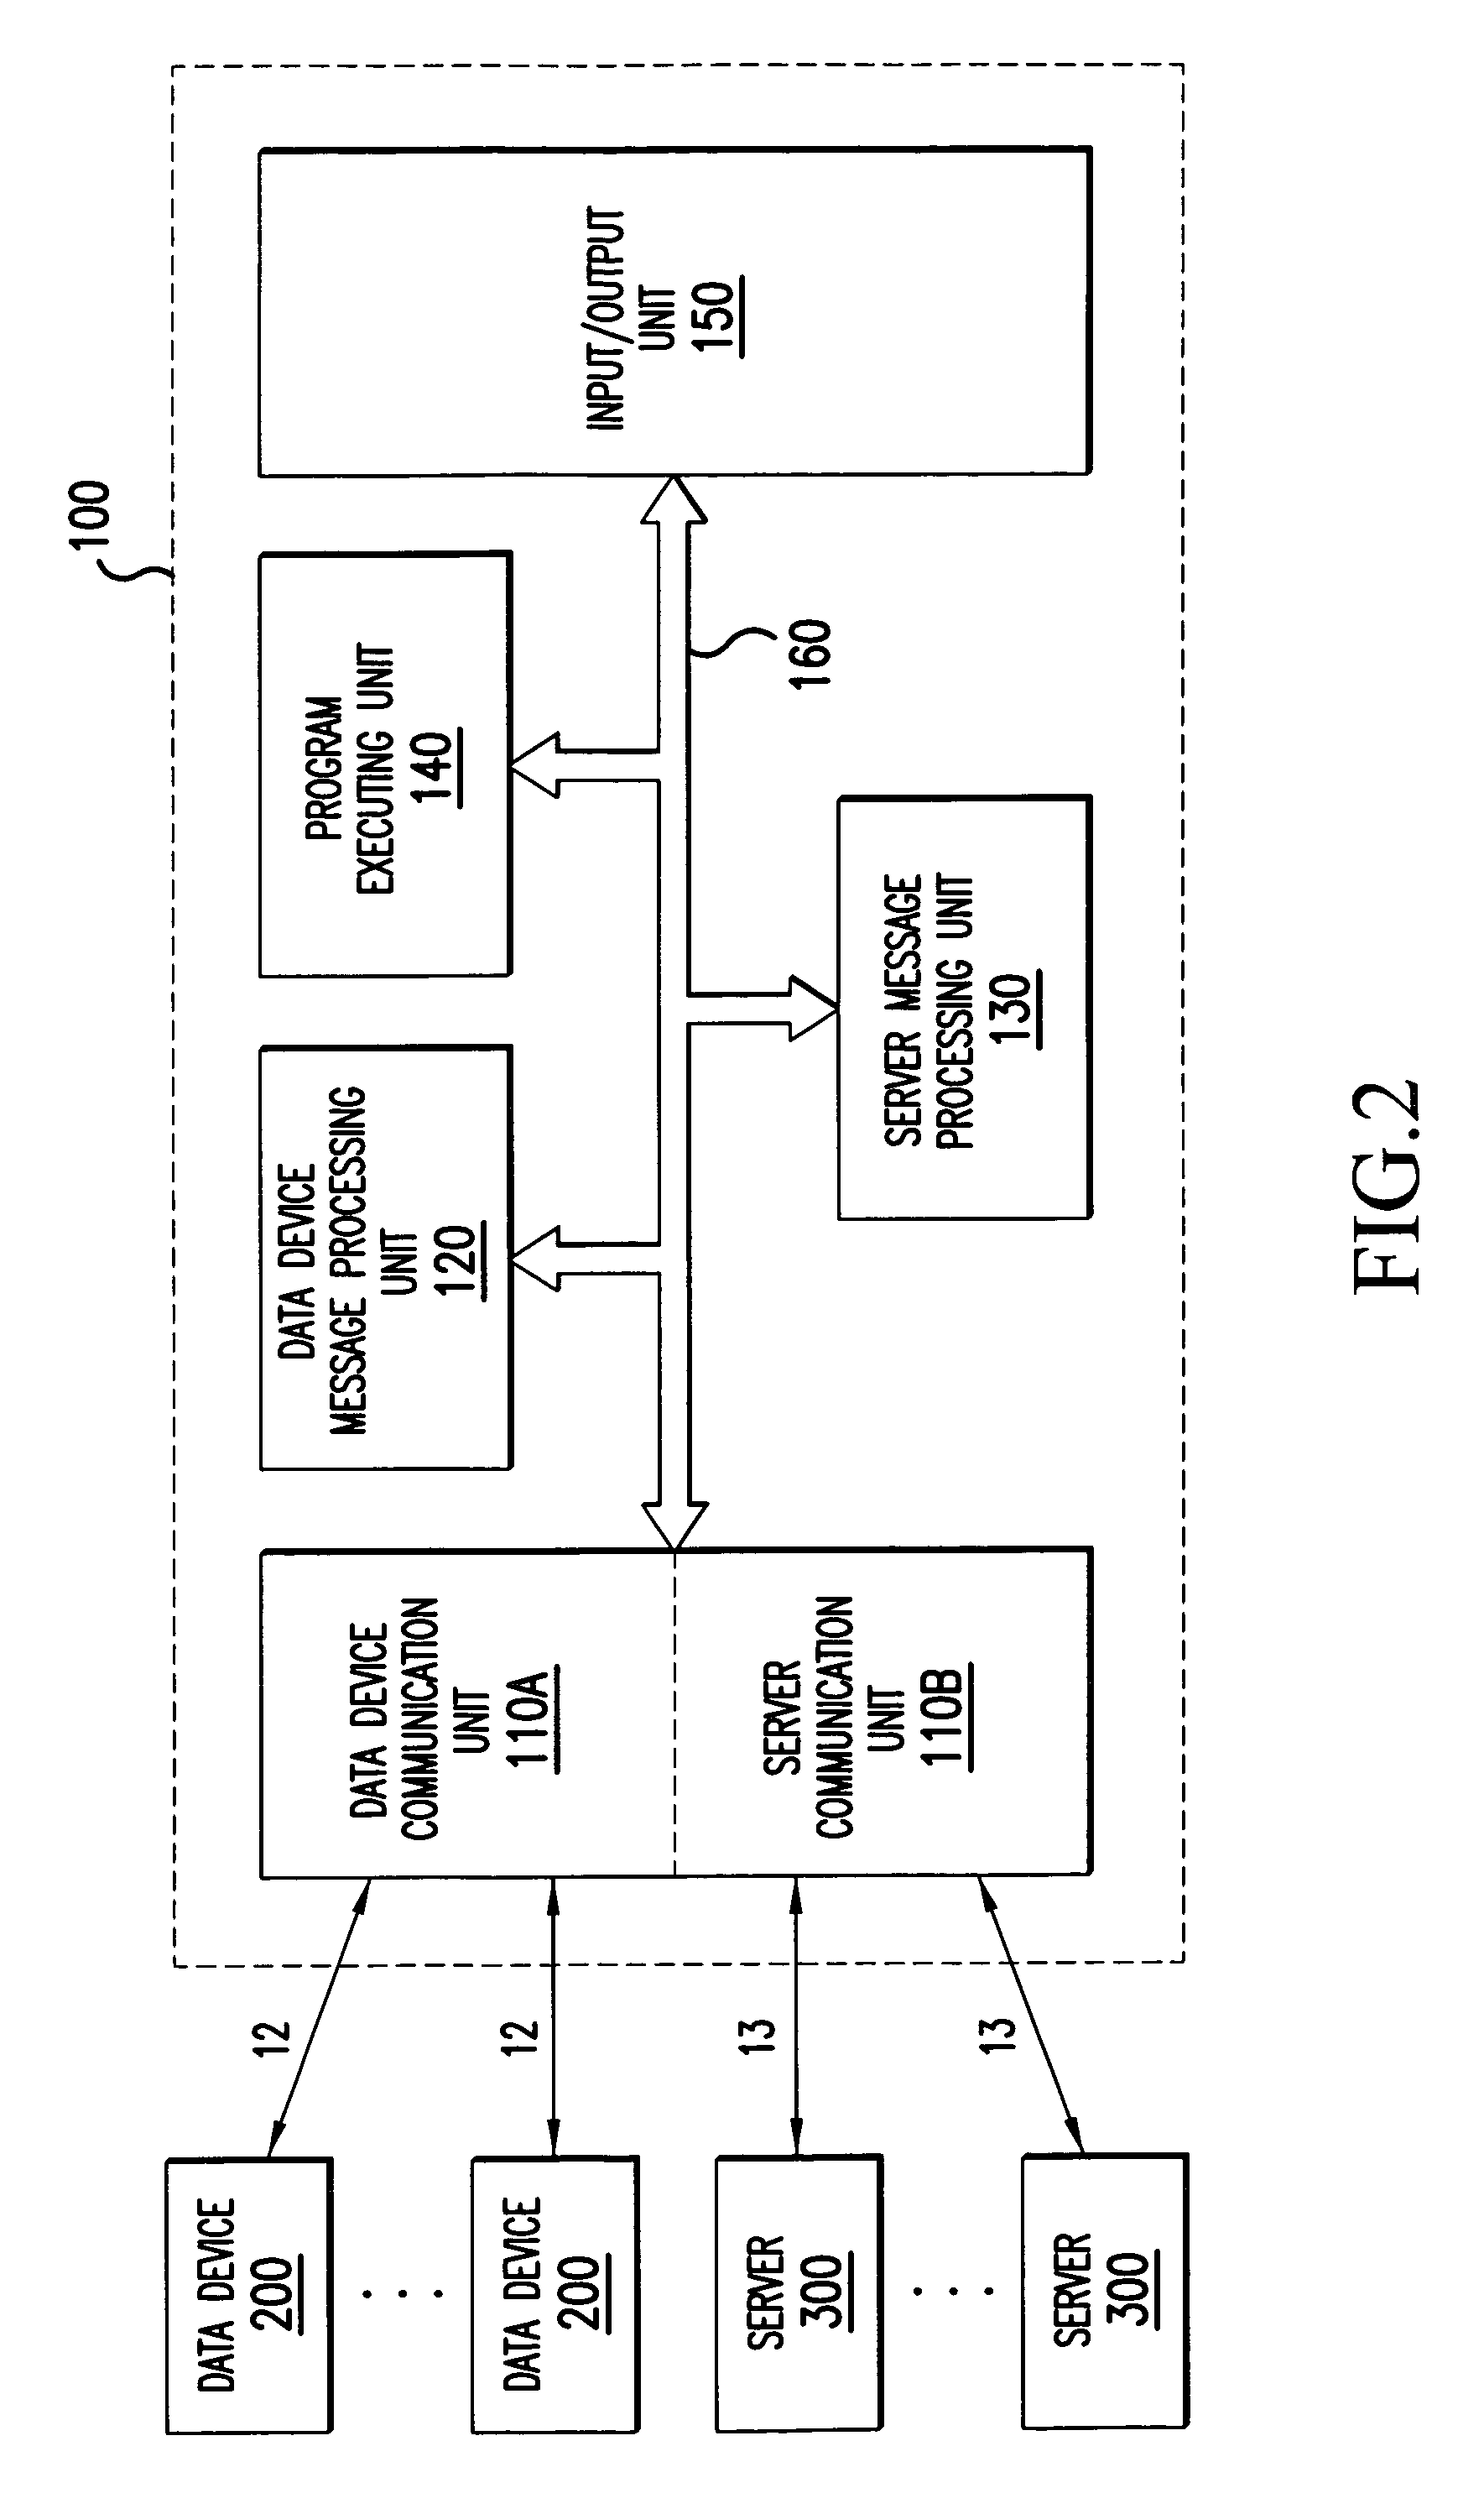 Method and device for providing interfaces that are tailored to specific devices